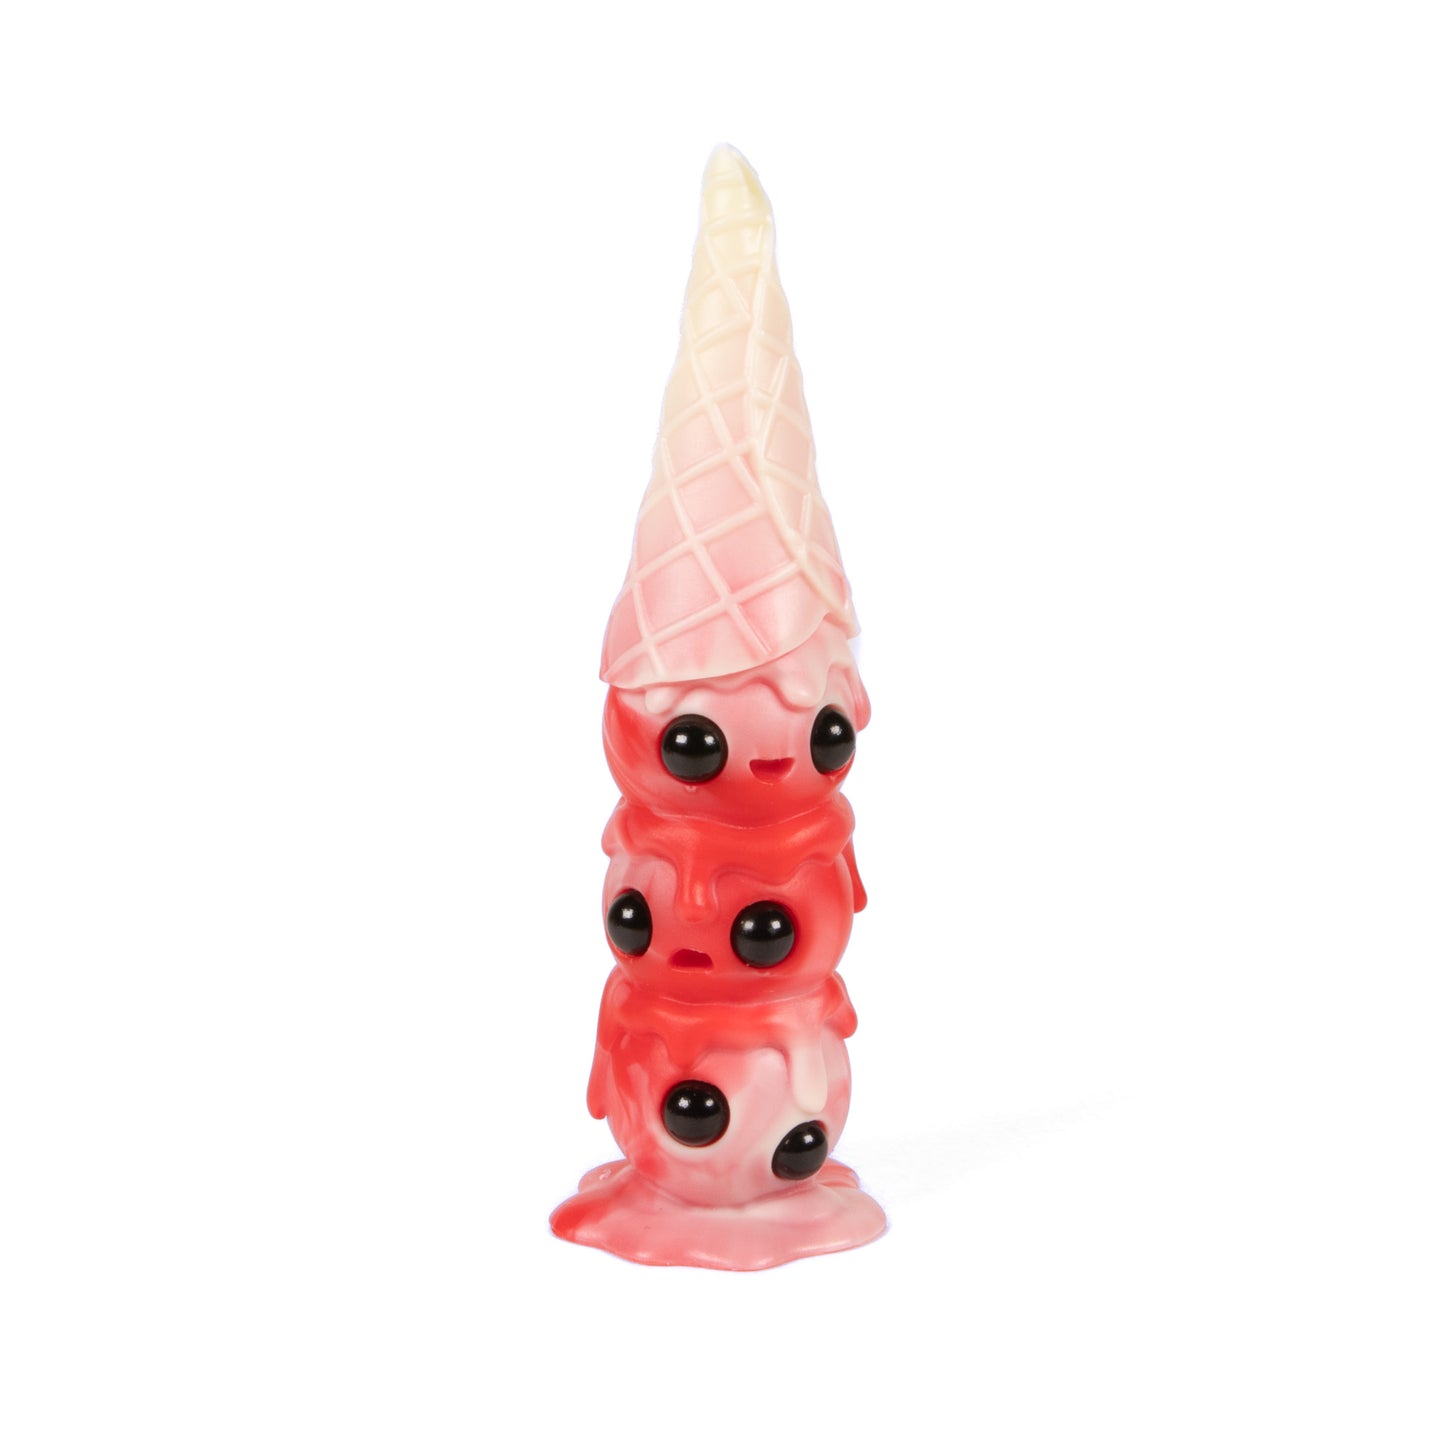 This is Wafull Strawberries and Cream Limited Edition Resin Figure